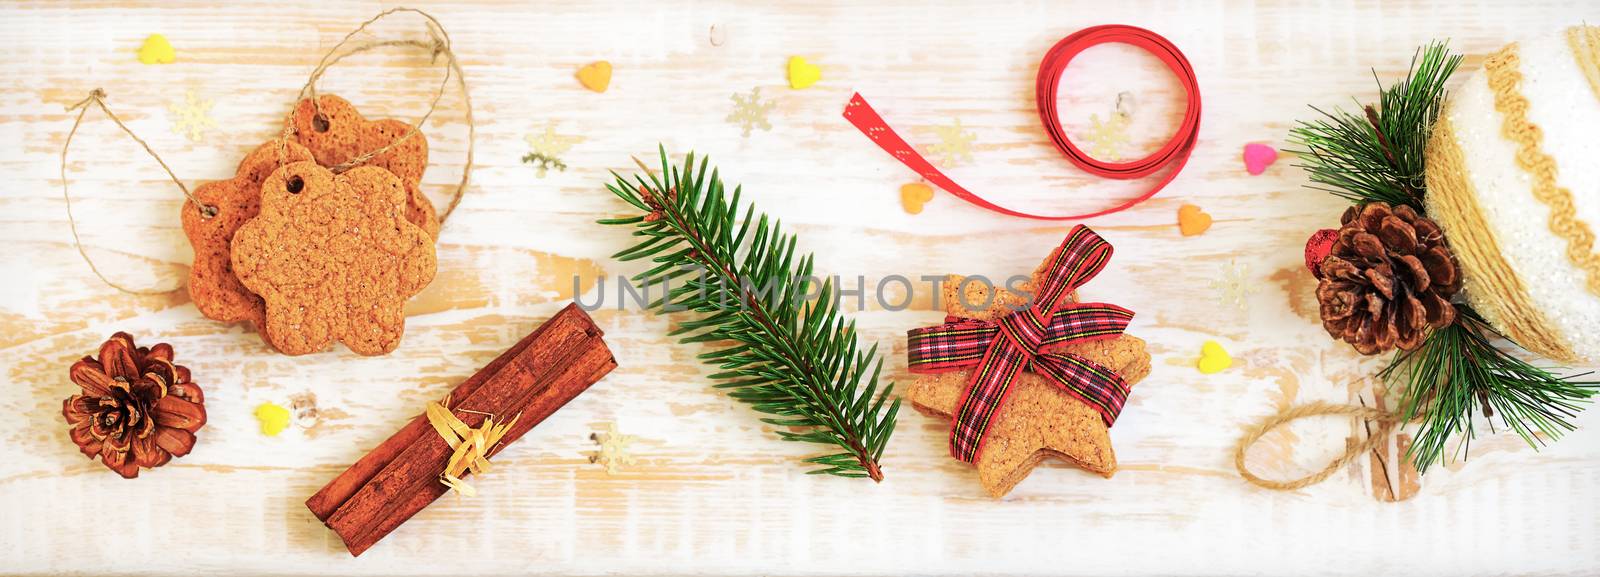 Christmas backgrounds. Christmas cookies. Holiday decorations, ornaments.